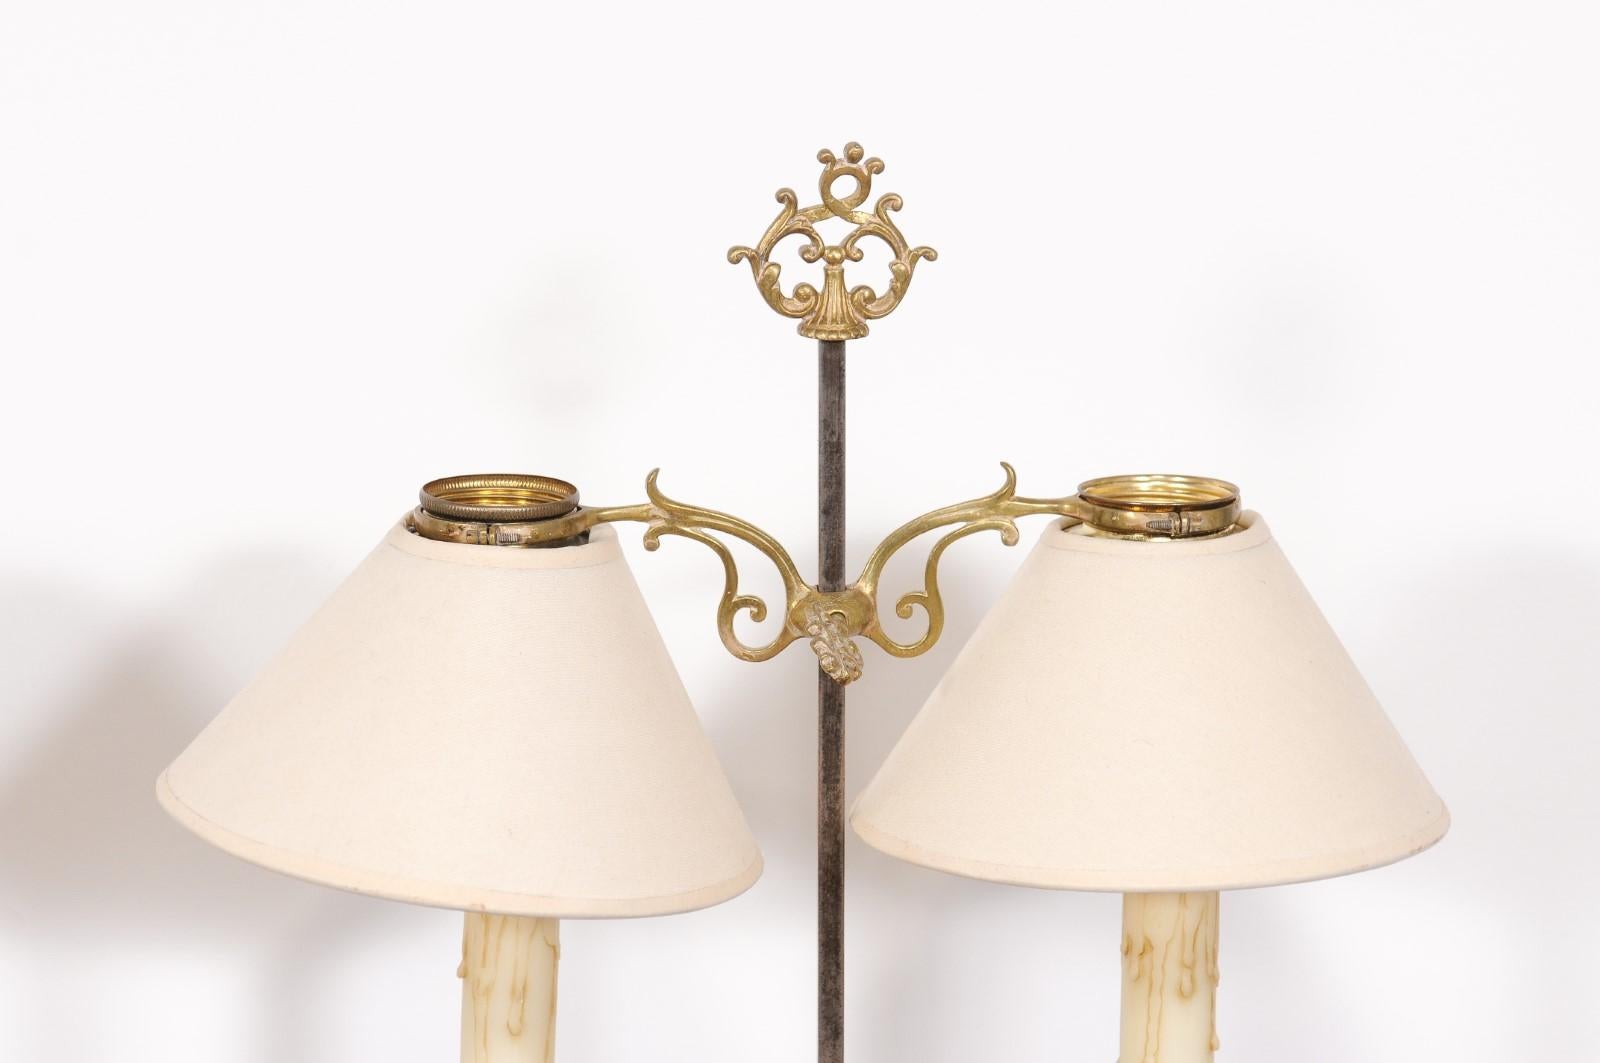 French 19th Century Brass Candlestick Lamps with Scrolling Arms, a Wired Pair For Sale 4